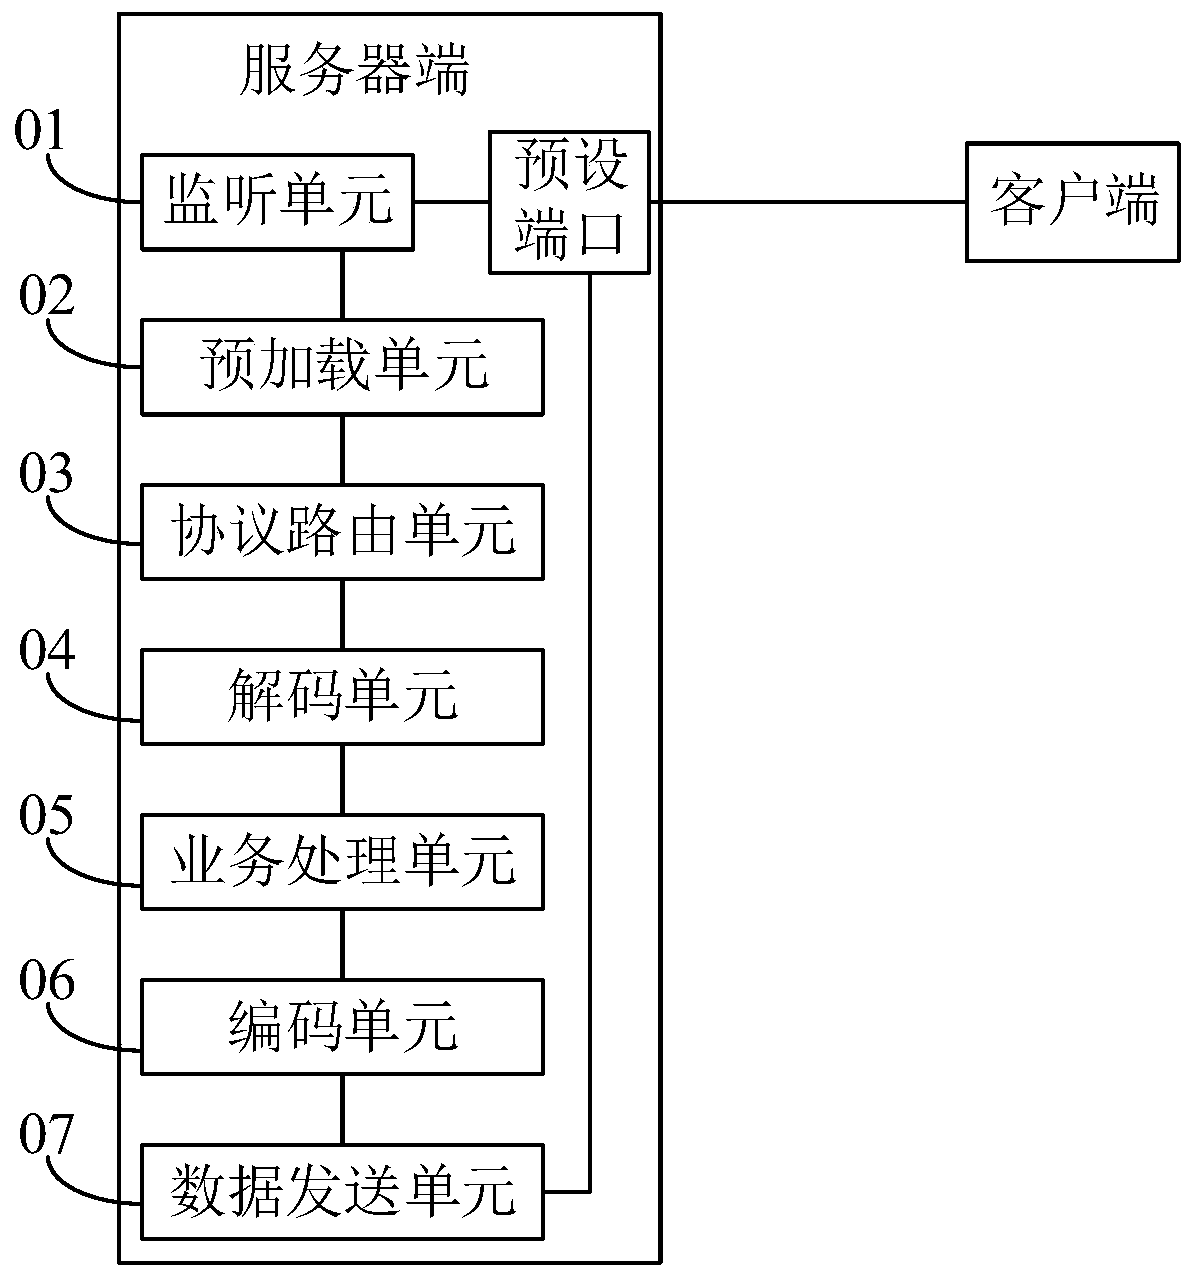 Memory, communication channel multiplexing implementation method, device and equipment